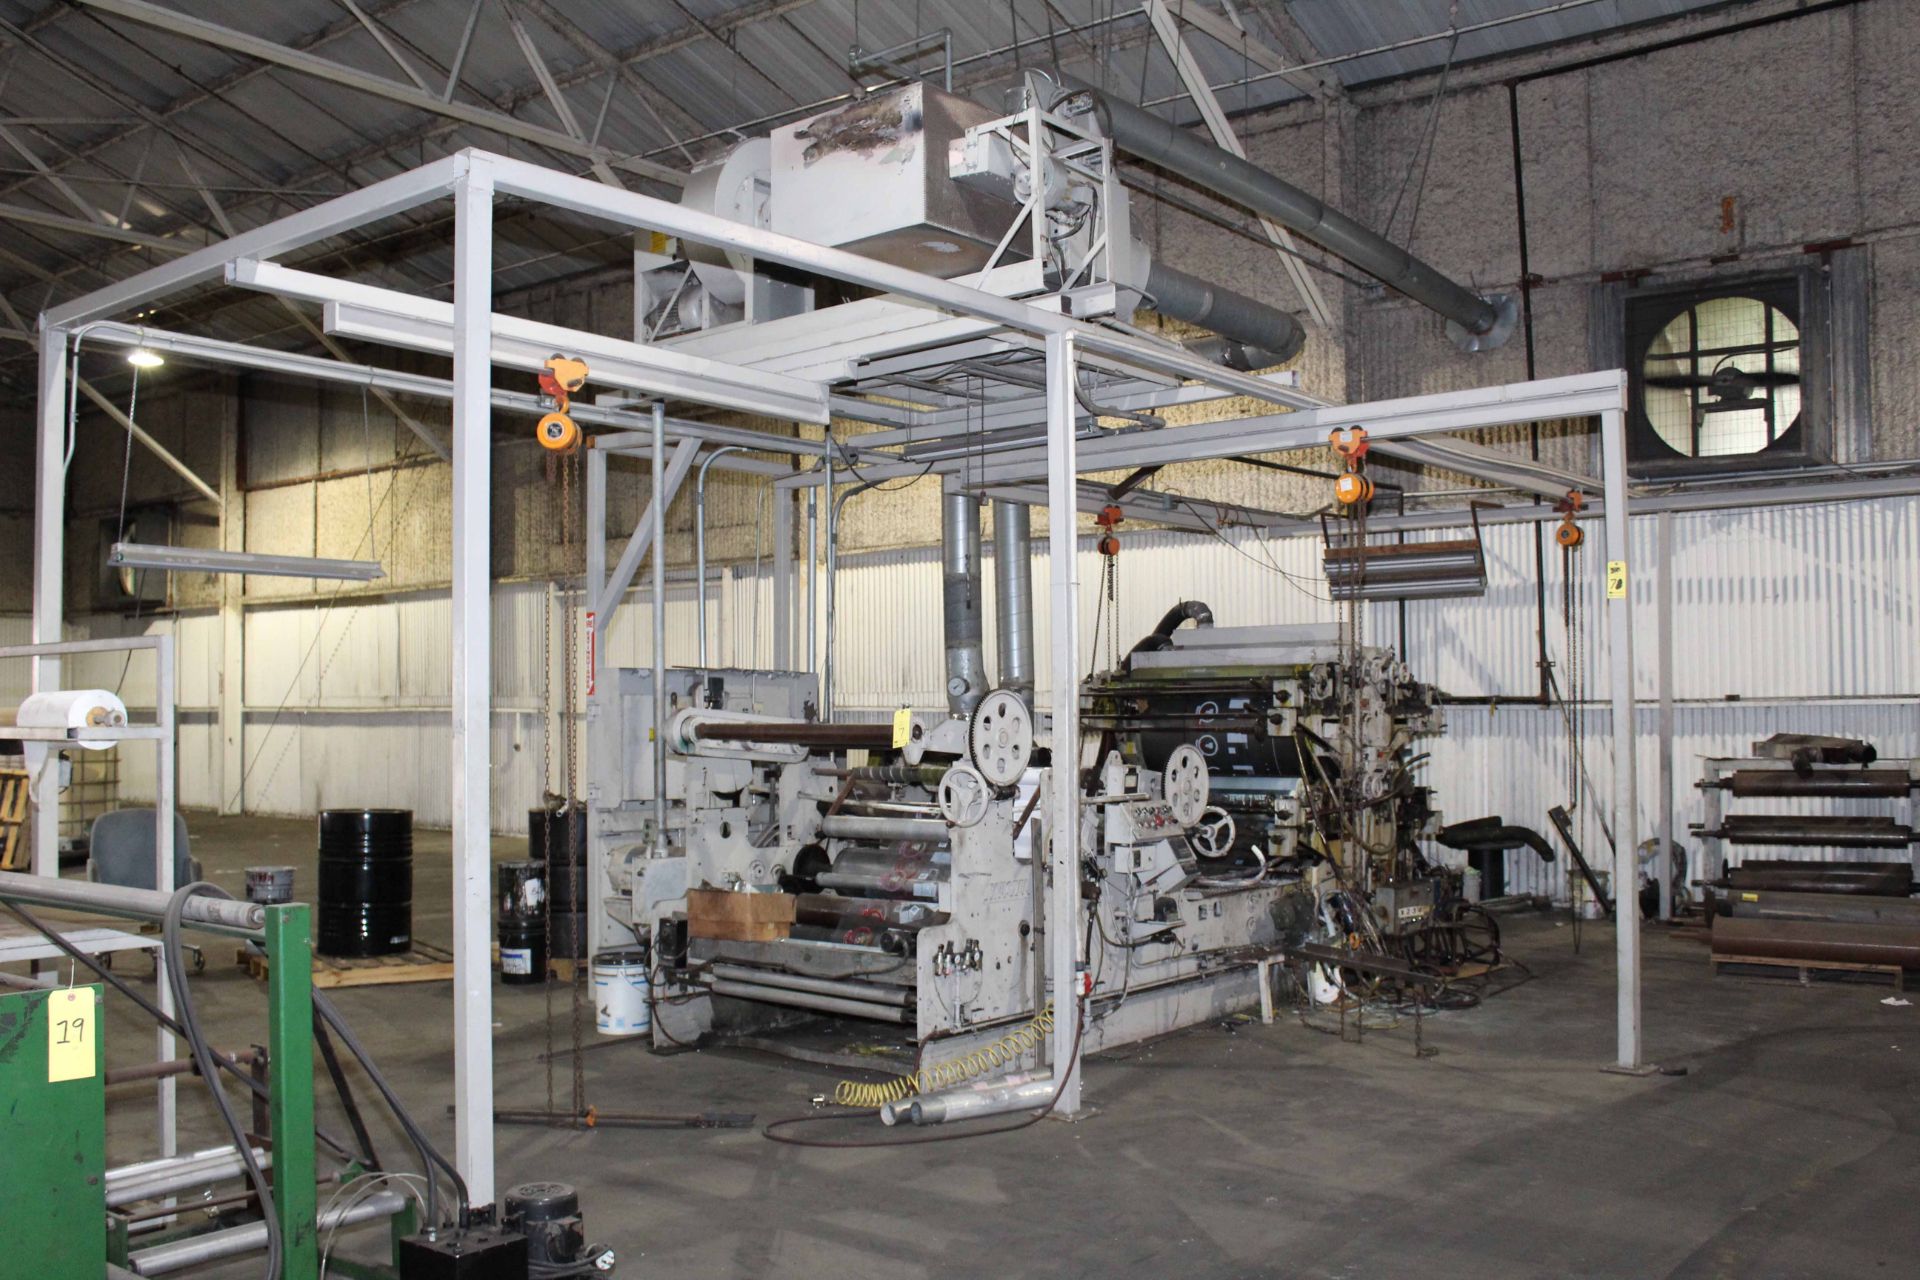 CI FLEXOGRAPHIC PRINTING PRESS, FAUSTEL MDL. E41-II, 44"W. cap., 4-color, fume exhaust blower